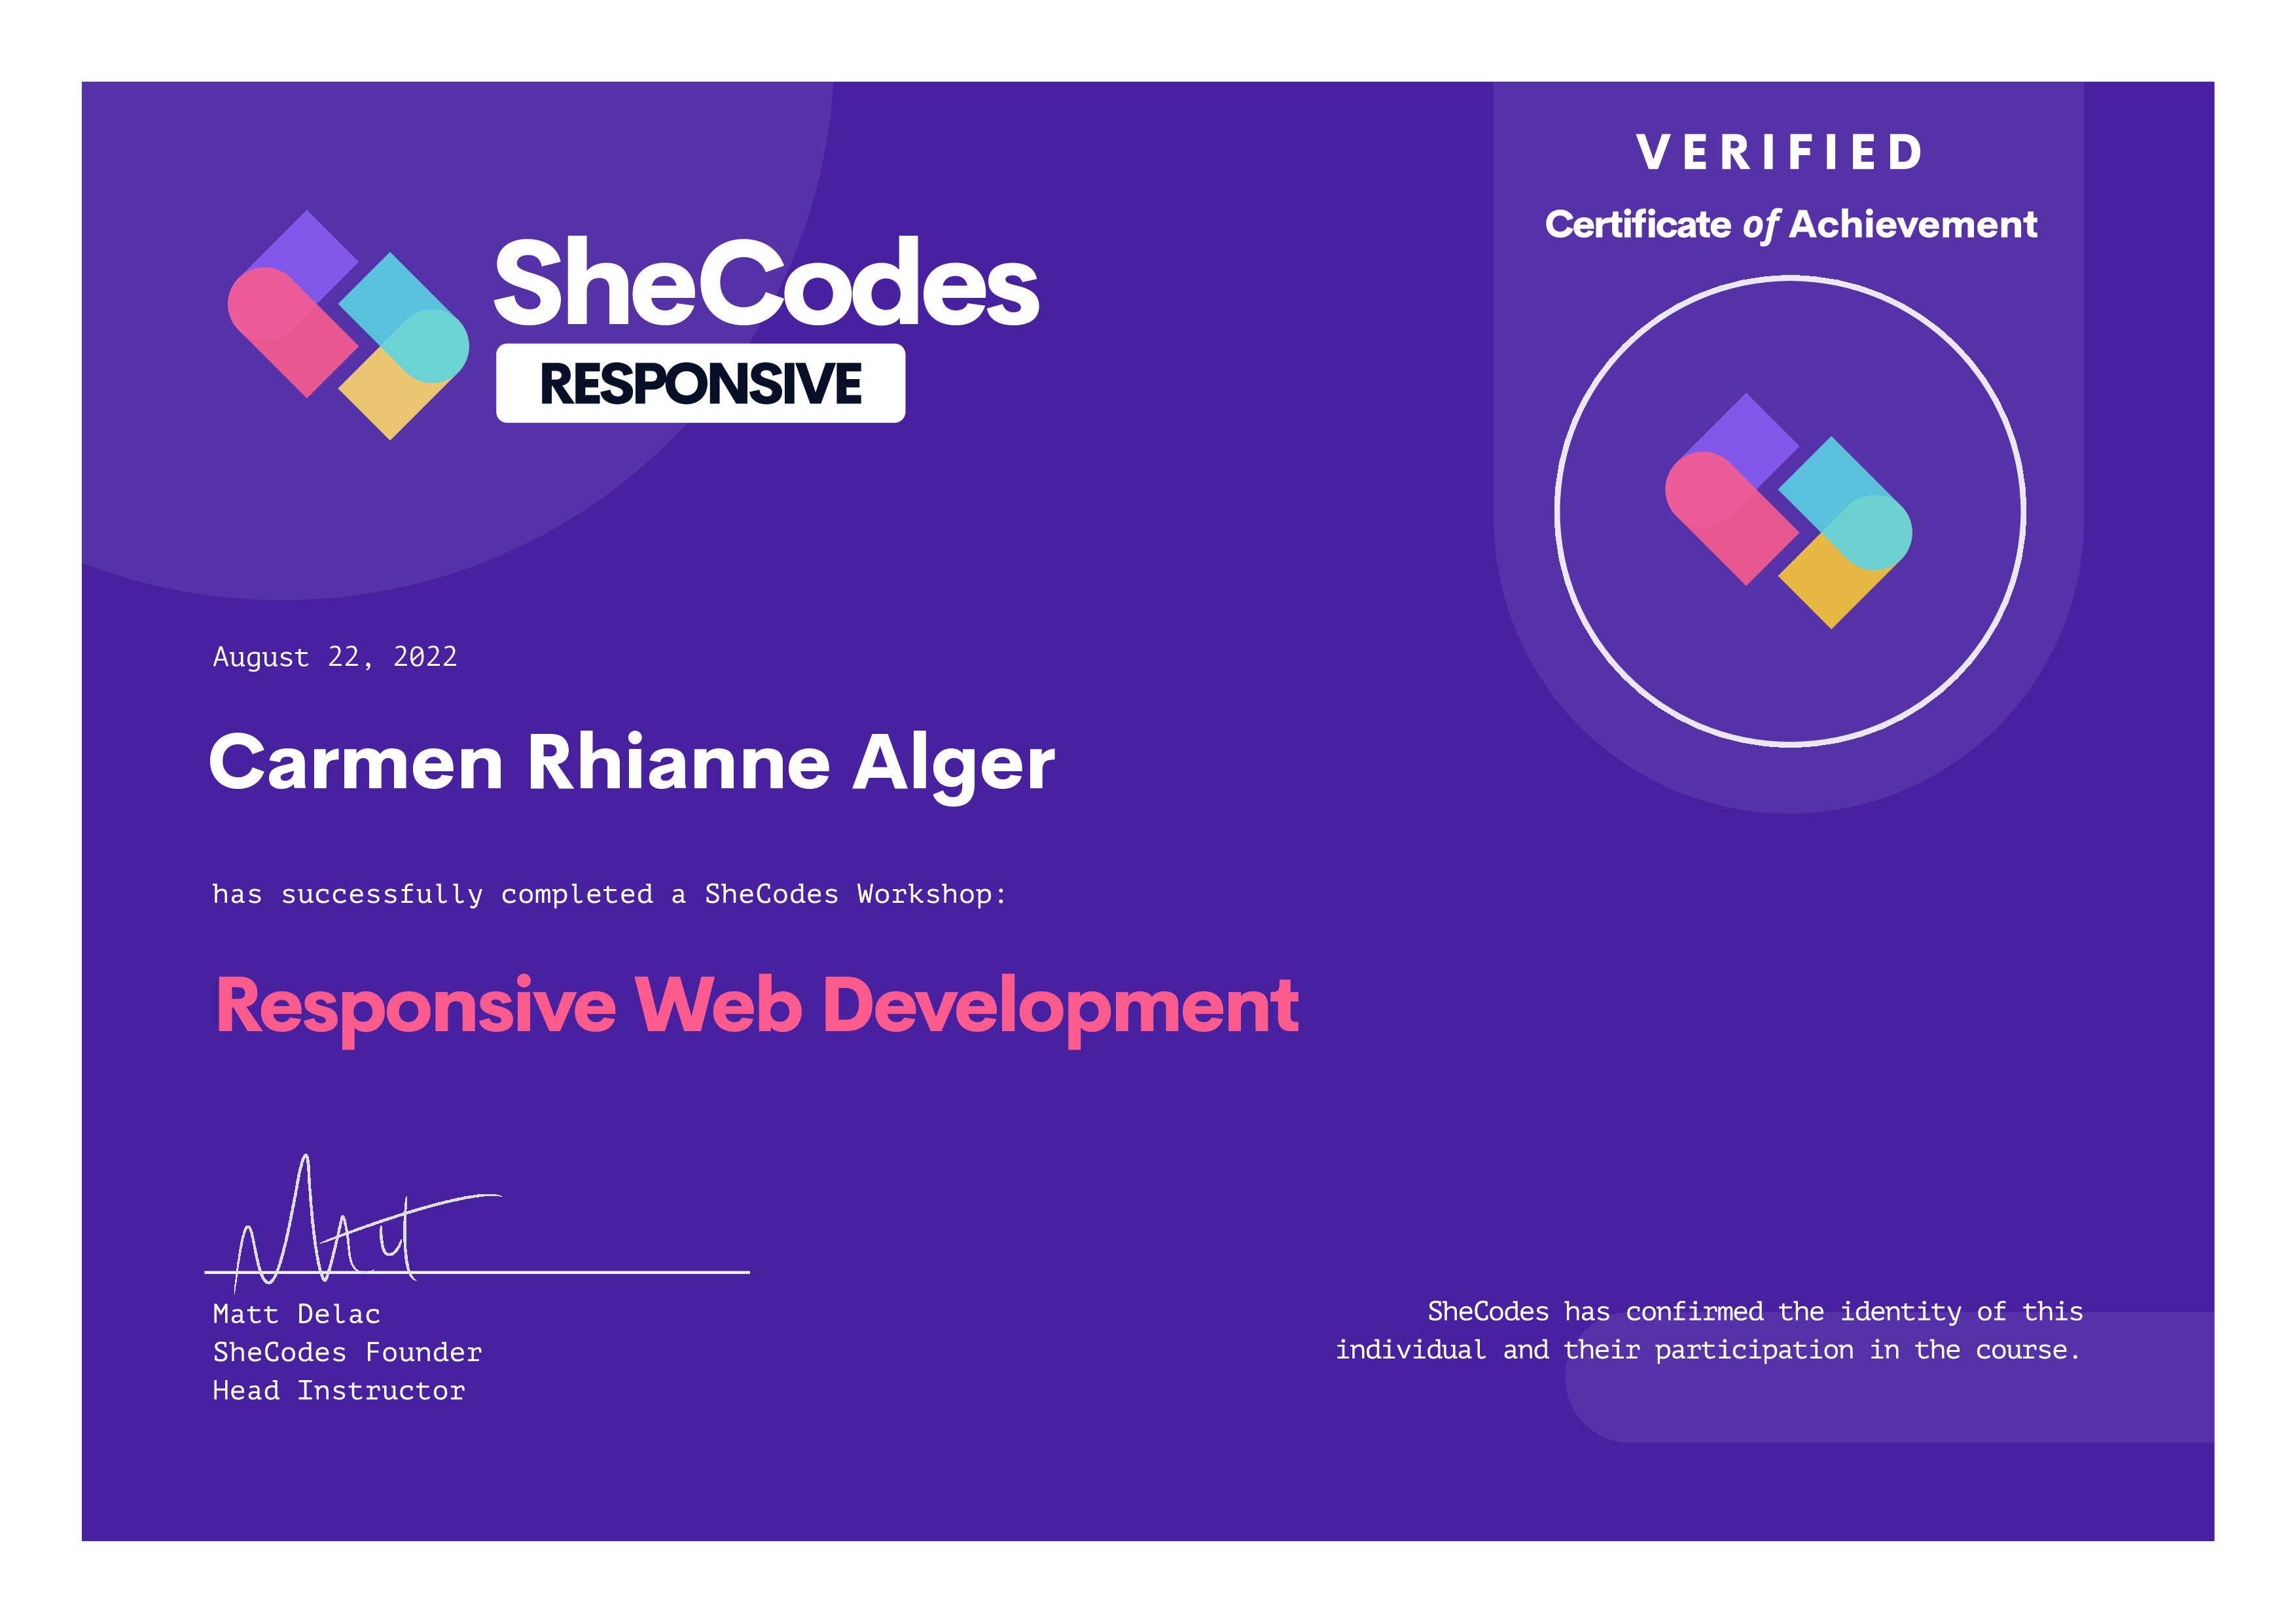 A certificate for the SheCodes Responsive course